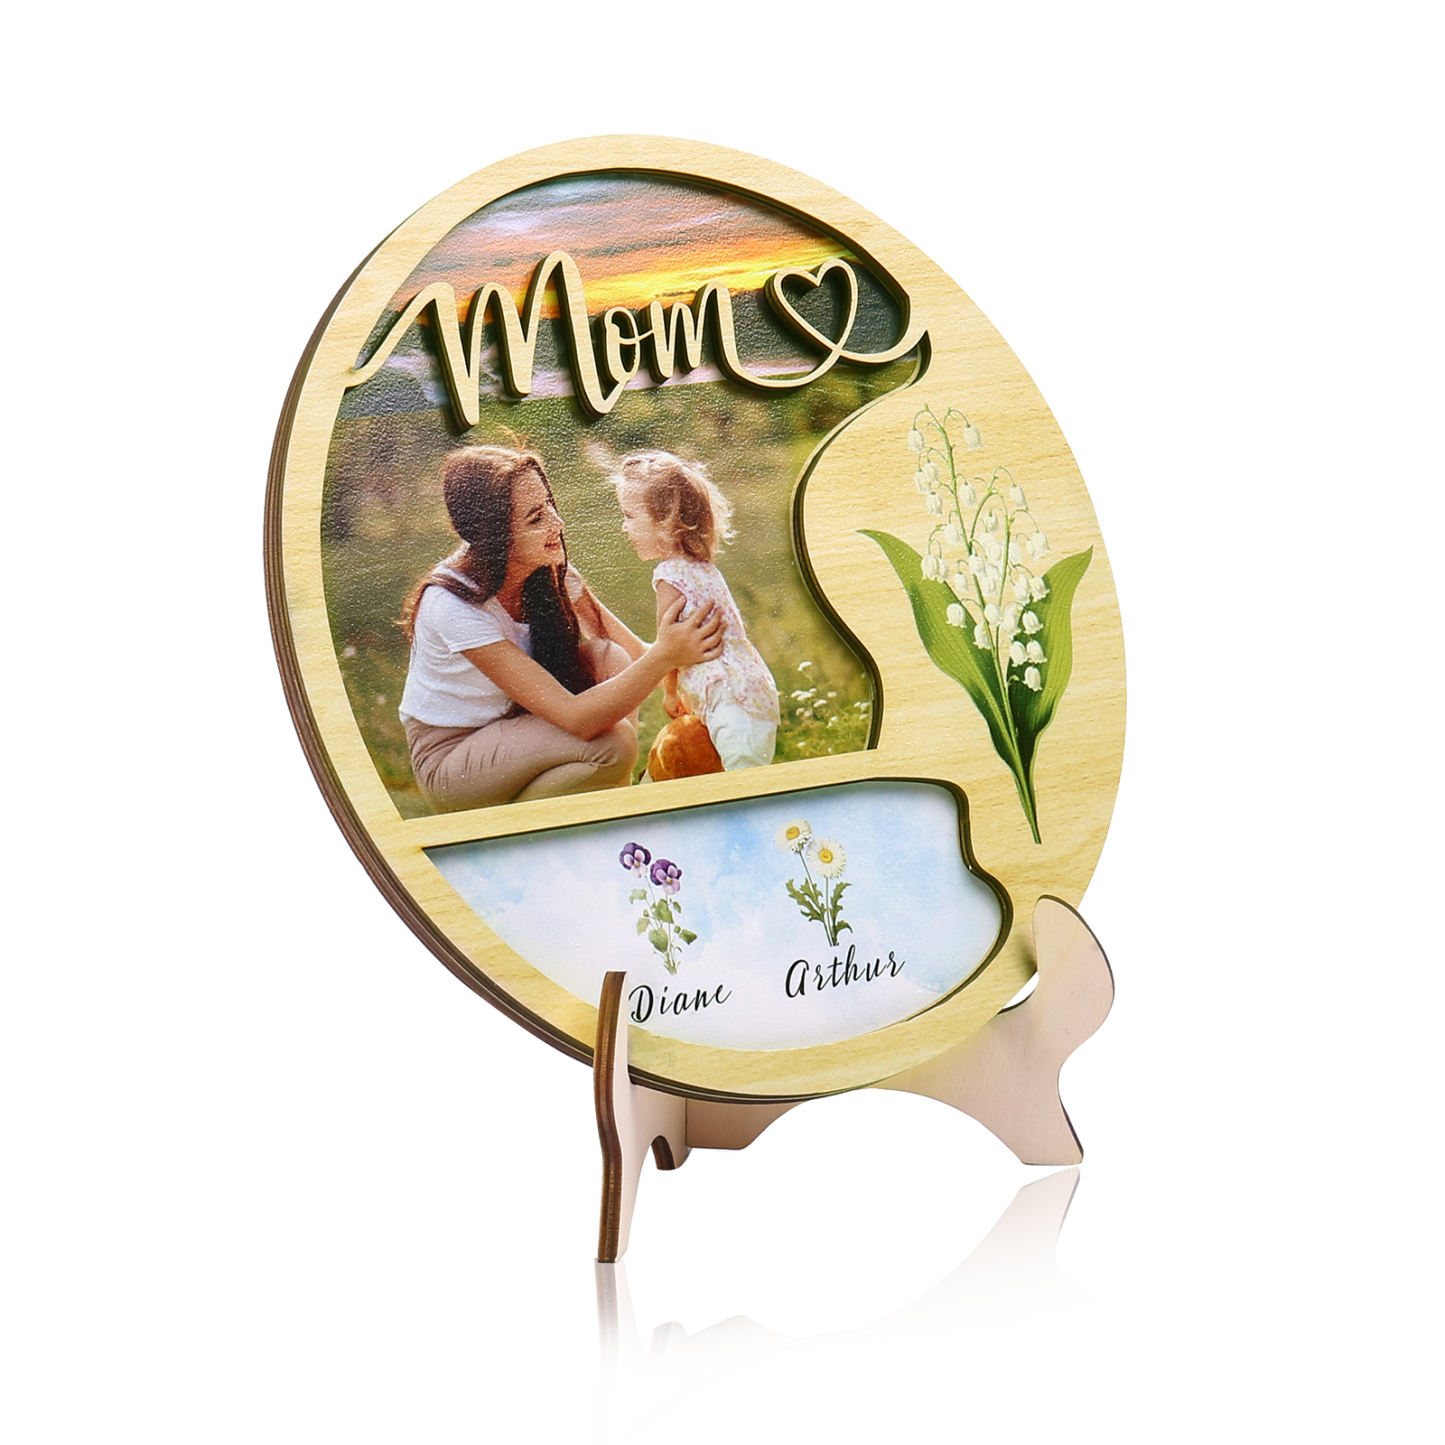 2 Names - Customized Photo Birthday Flowers and Text Wooden Ornaments for Mom/Grandma